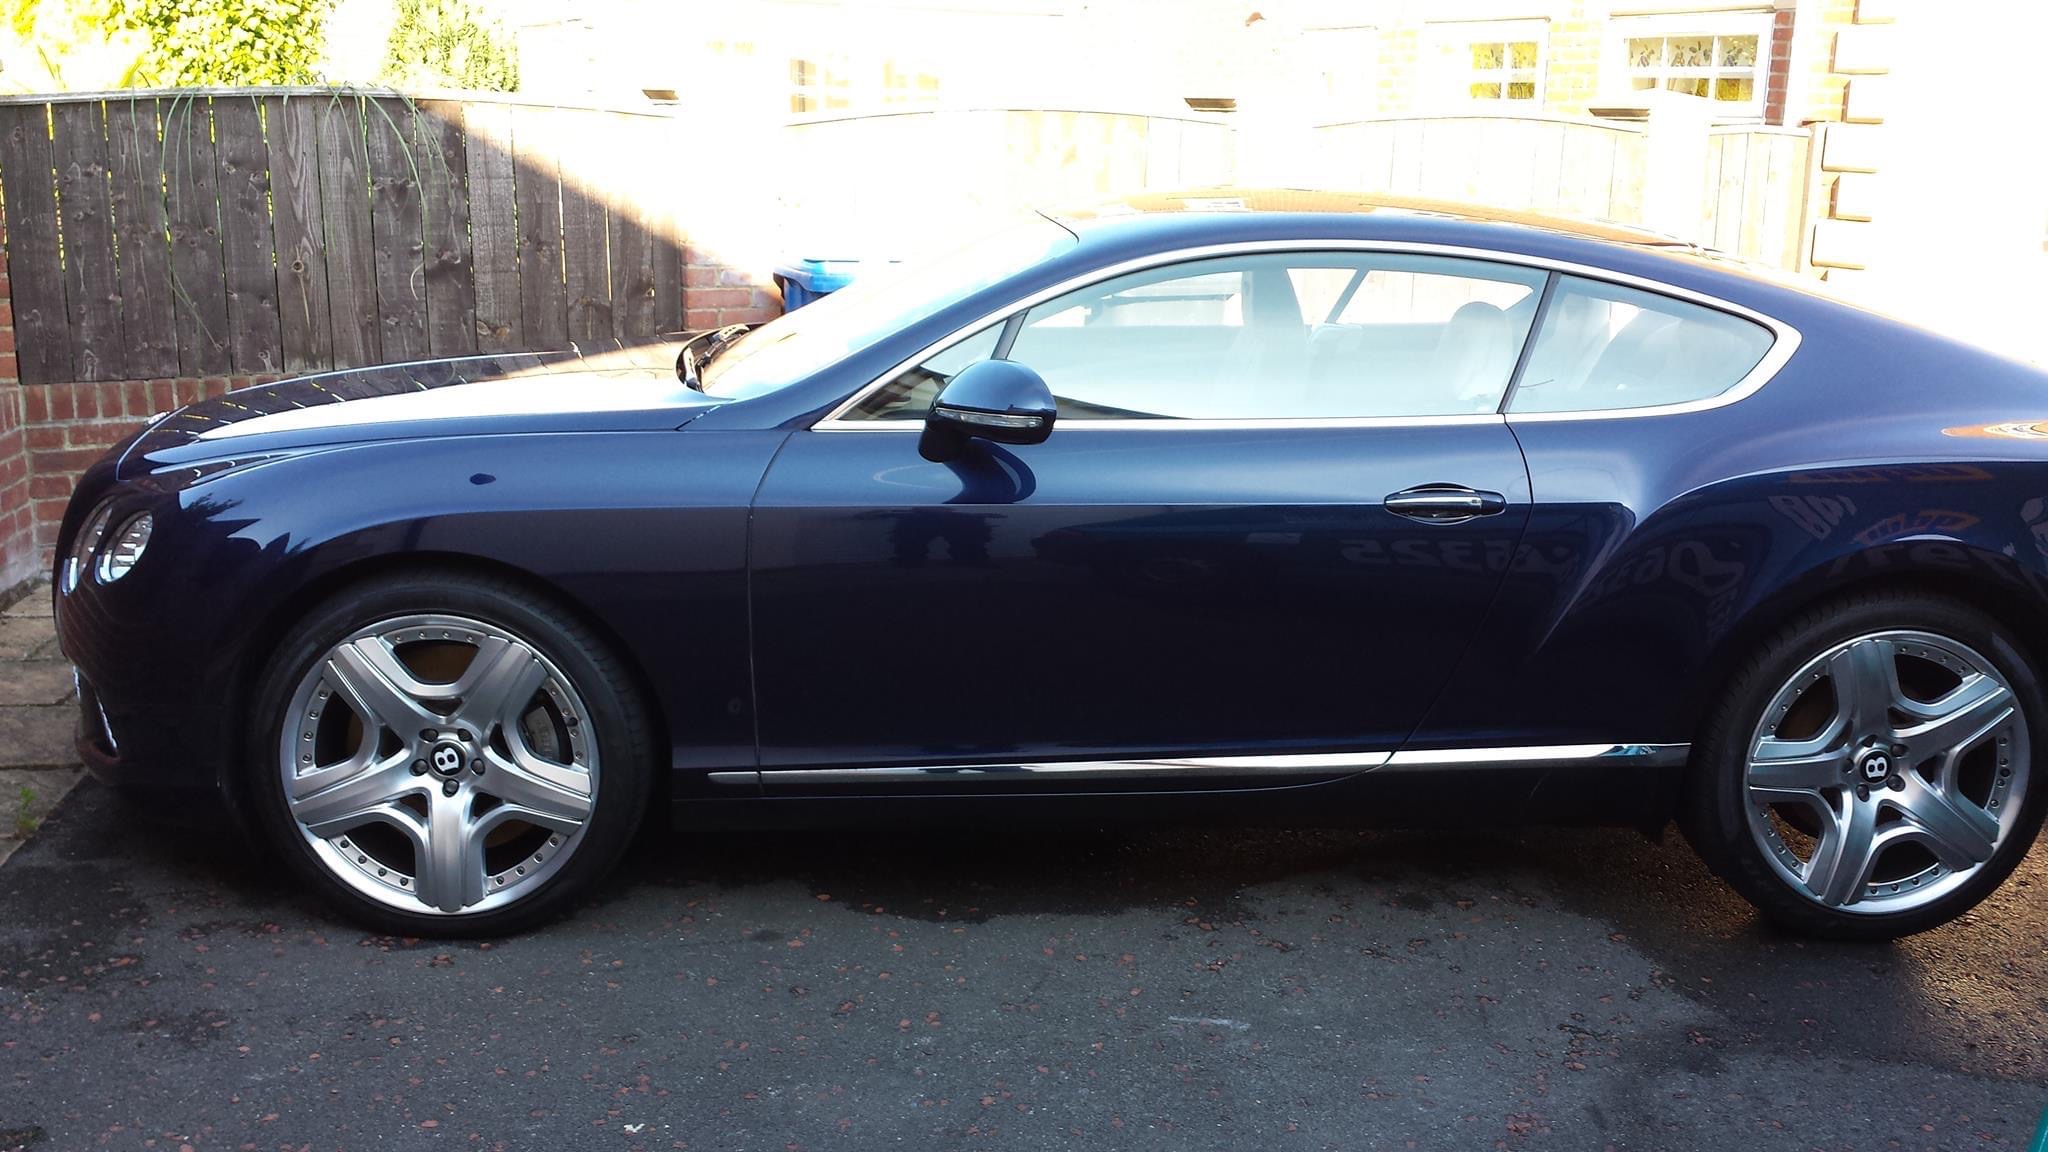 Professional Car & Commercial Valeting Service